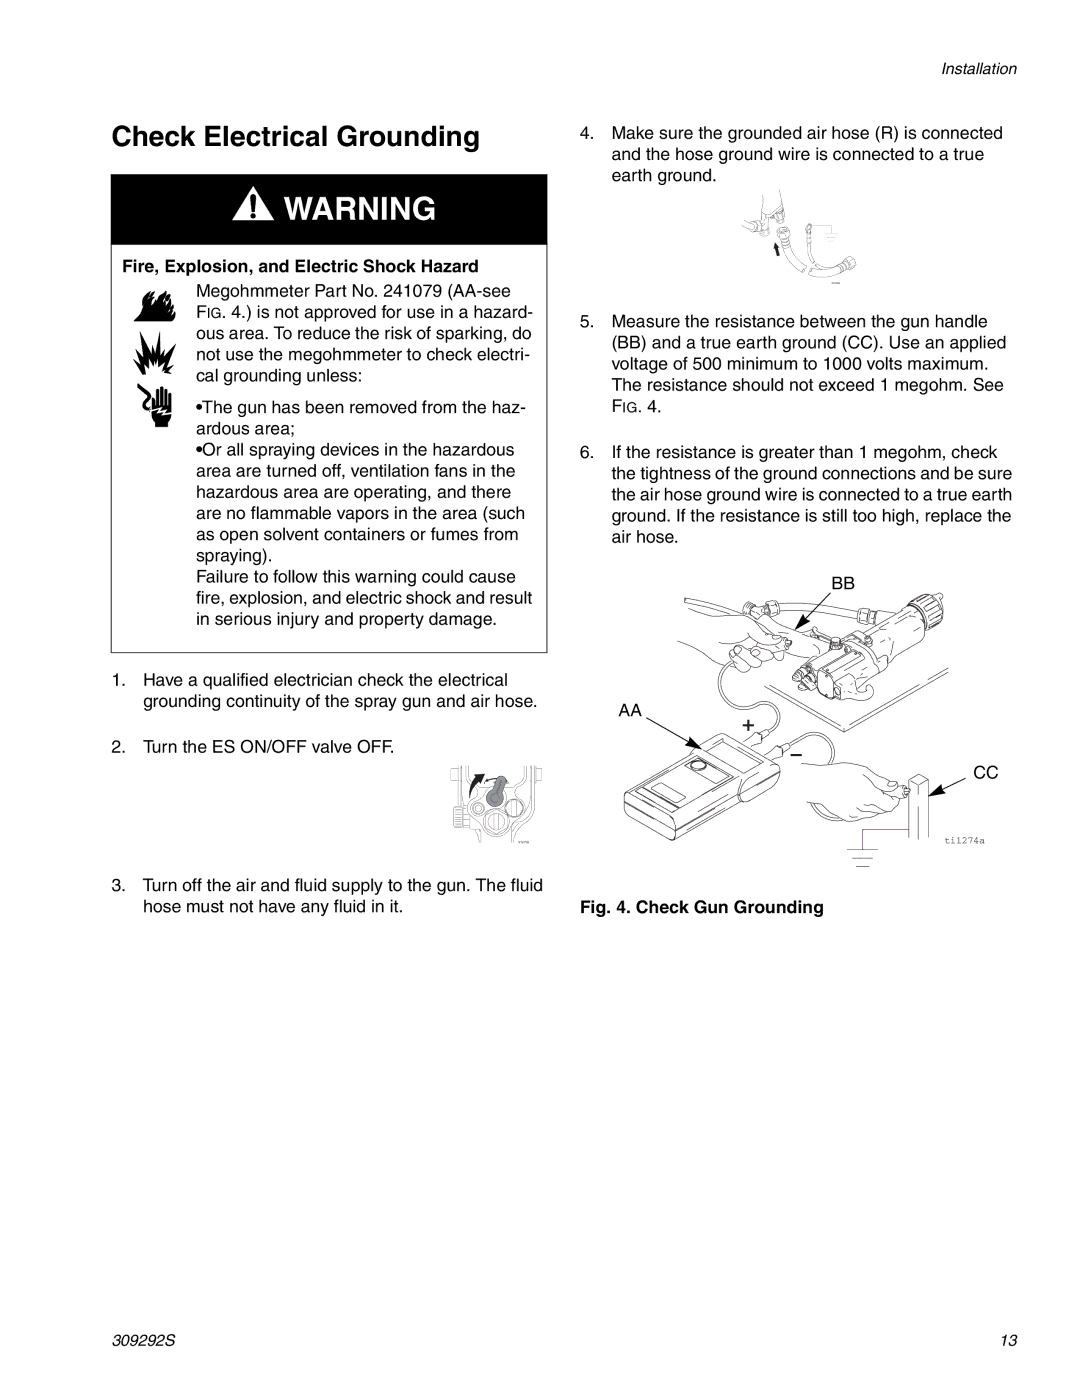 Graco Inc ti1600a, 309292S, ti1248a important safety instructions Check Electrical Grounding, Check Gun Grounding 